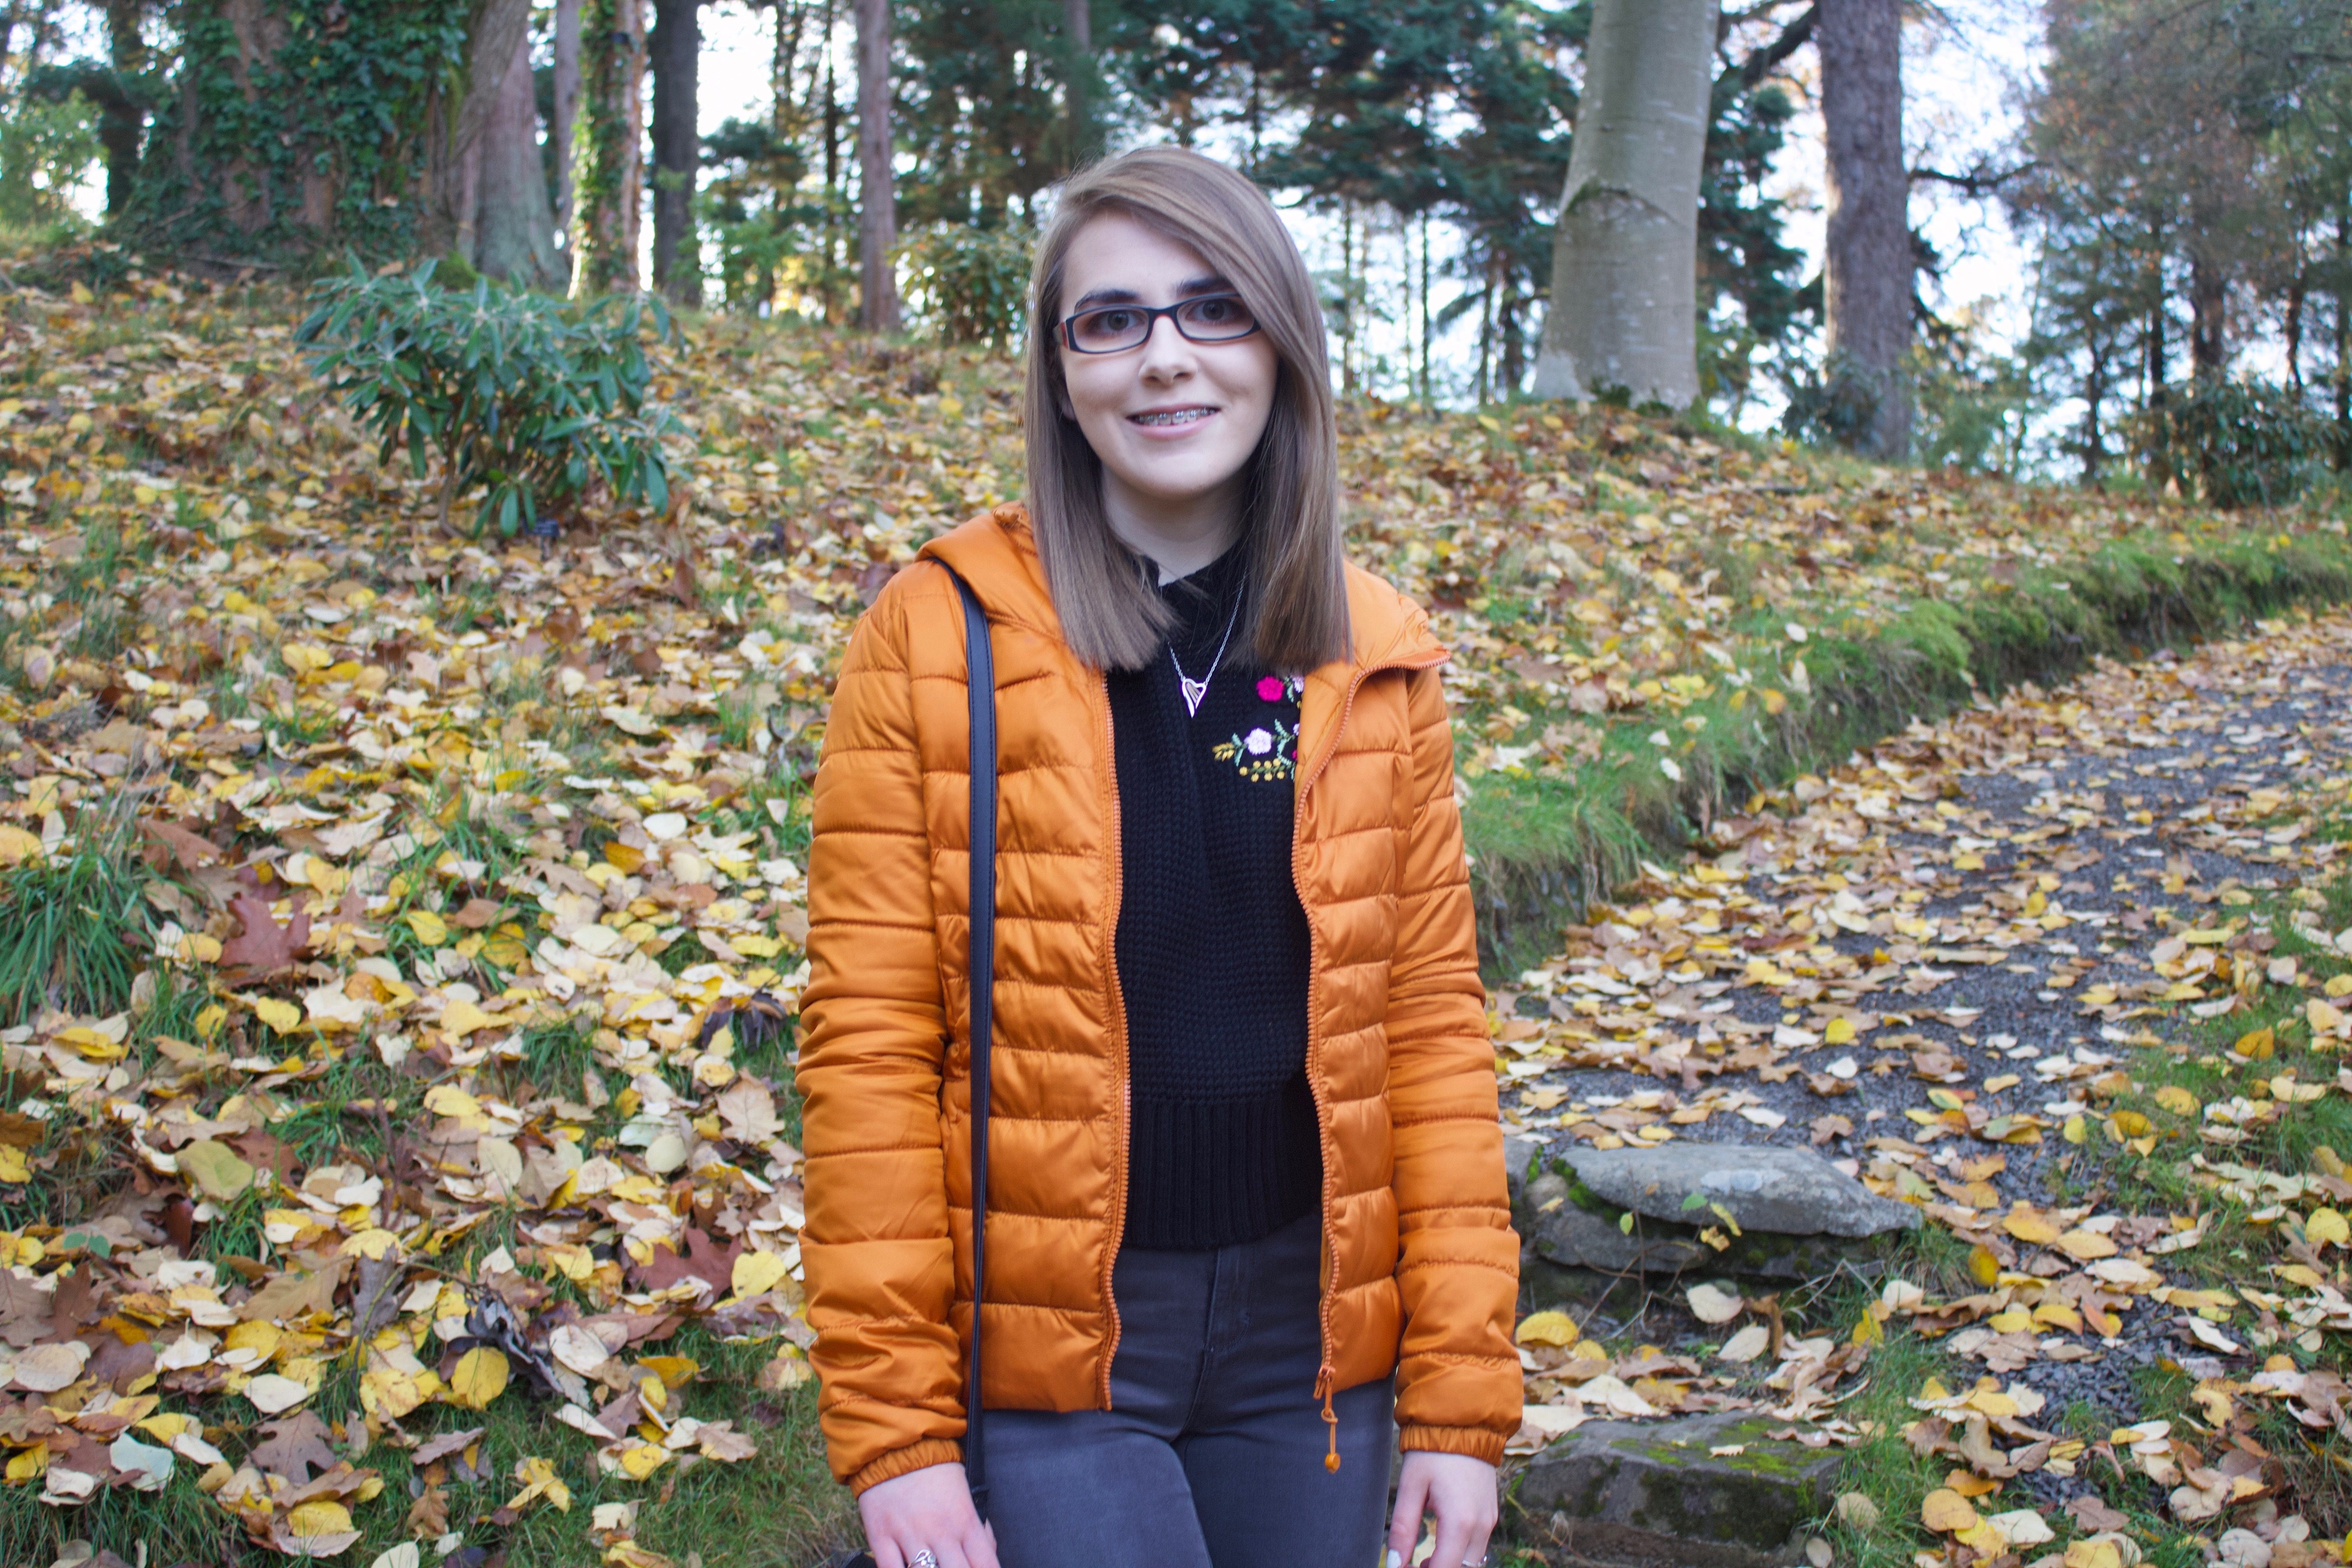 Elin stands smiling on a path in the woods. It's fall - she's surrounded by fallen leaves and she's wearing a warm, puffy orange coat.